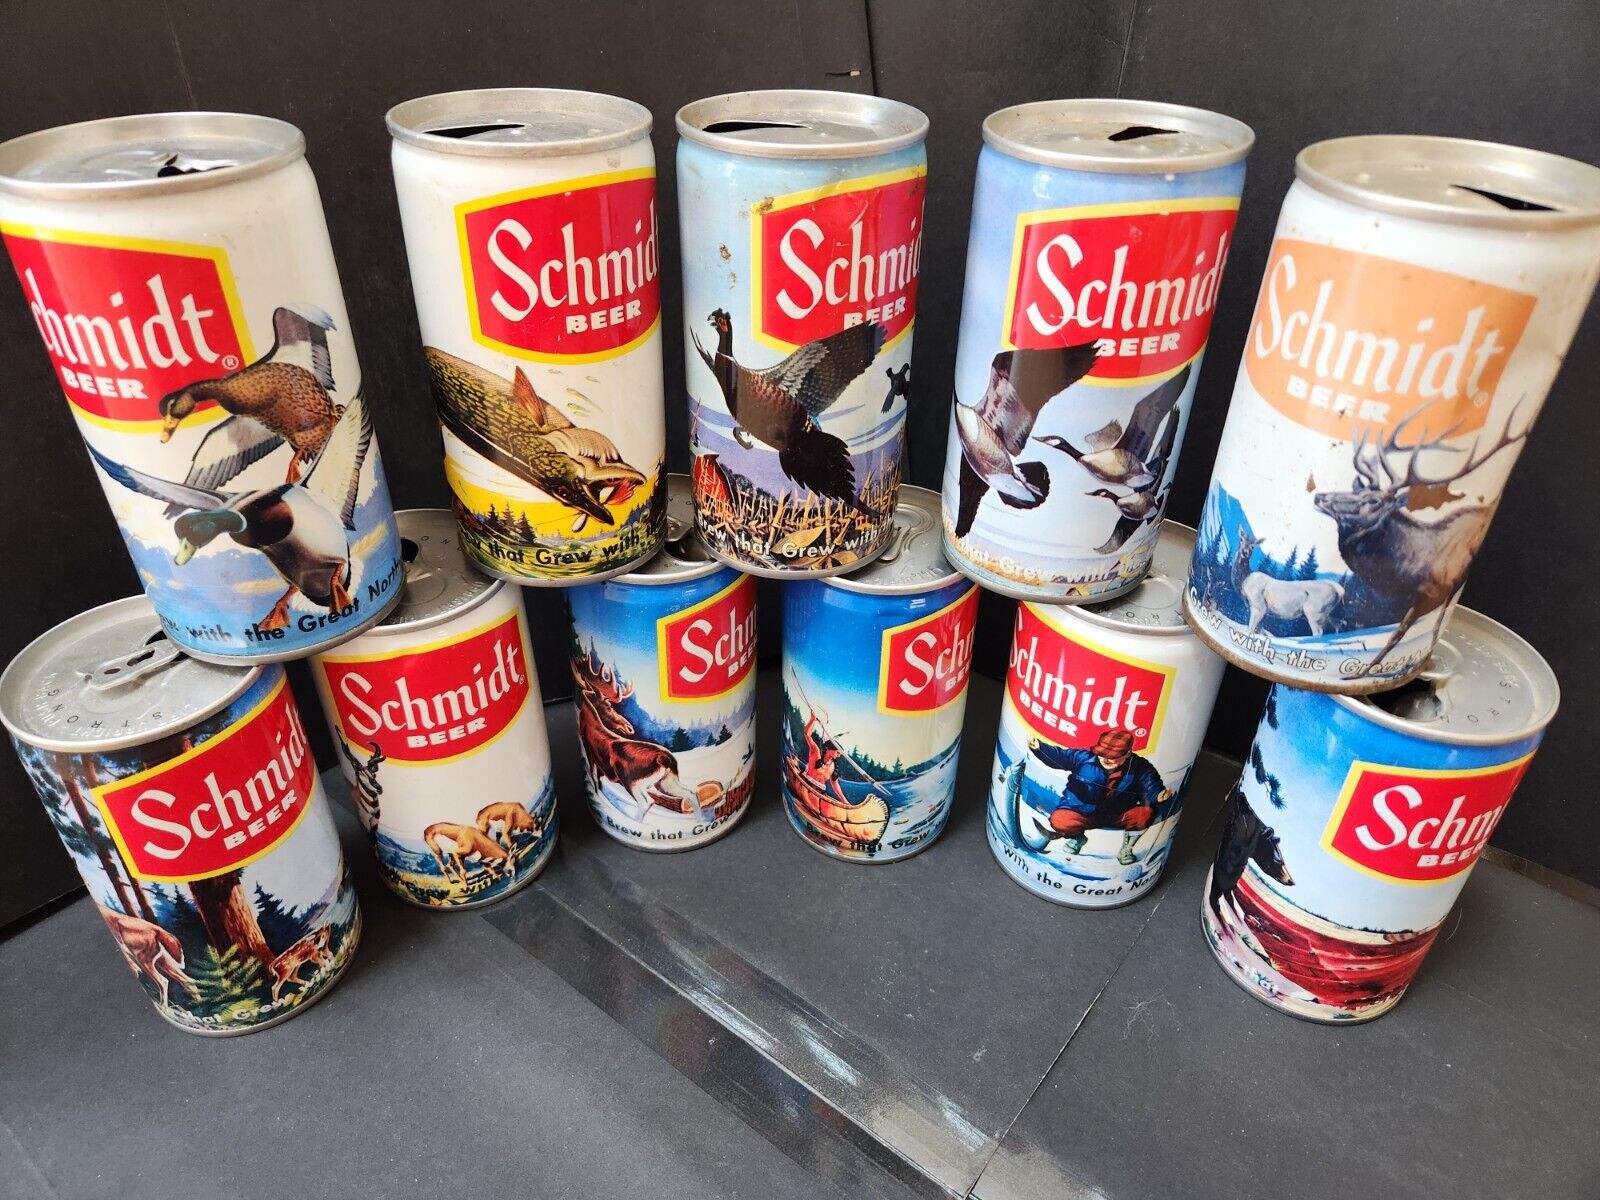 SCHMIDT BEER SCENIC CANS - CUSTOM 11 CAN BUYER REQUESTED LOT